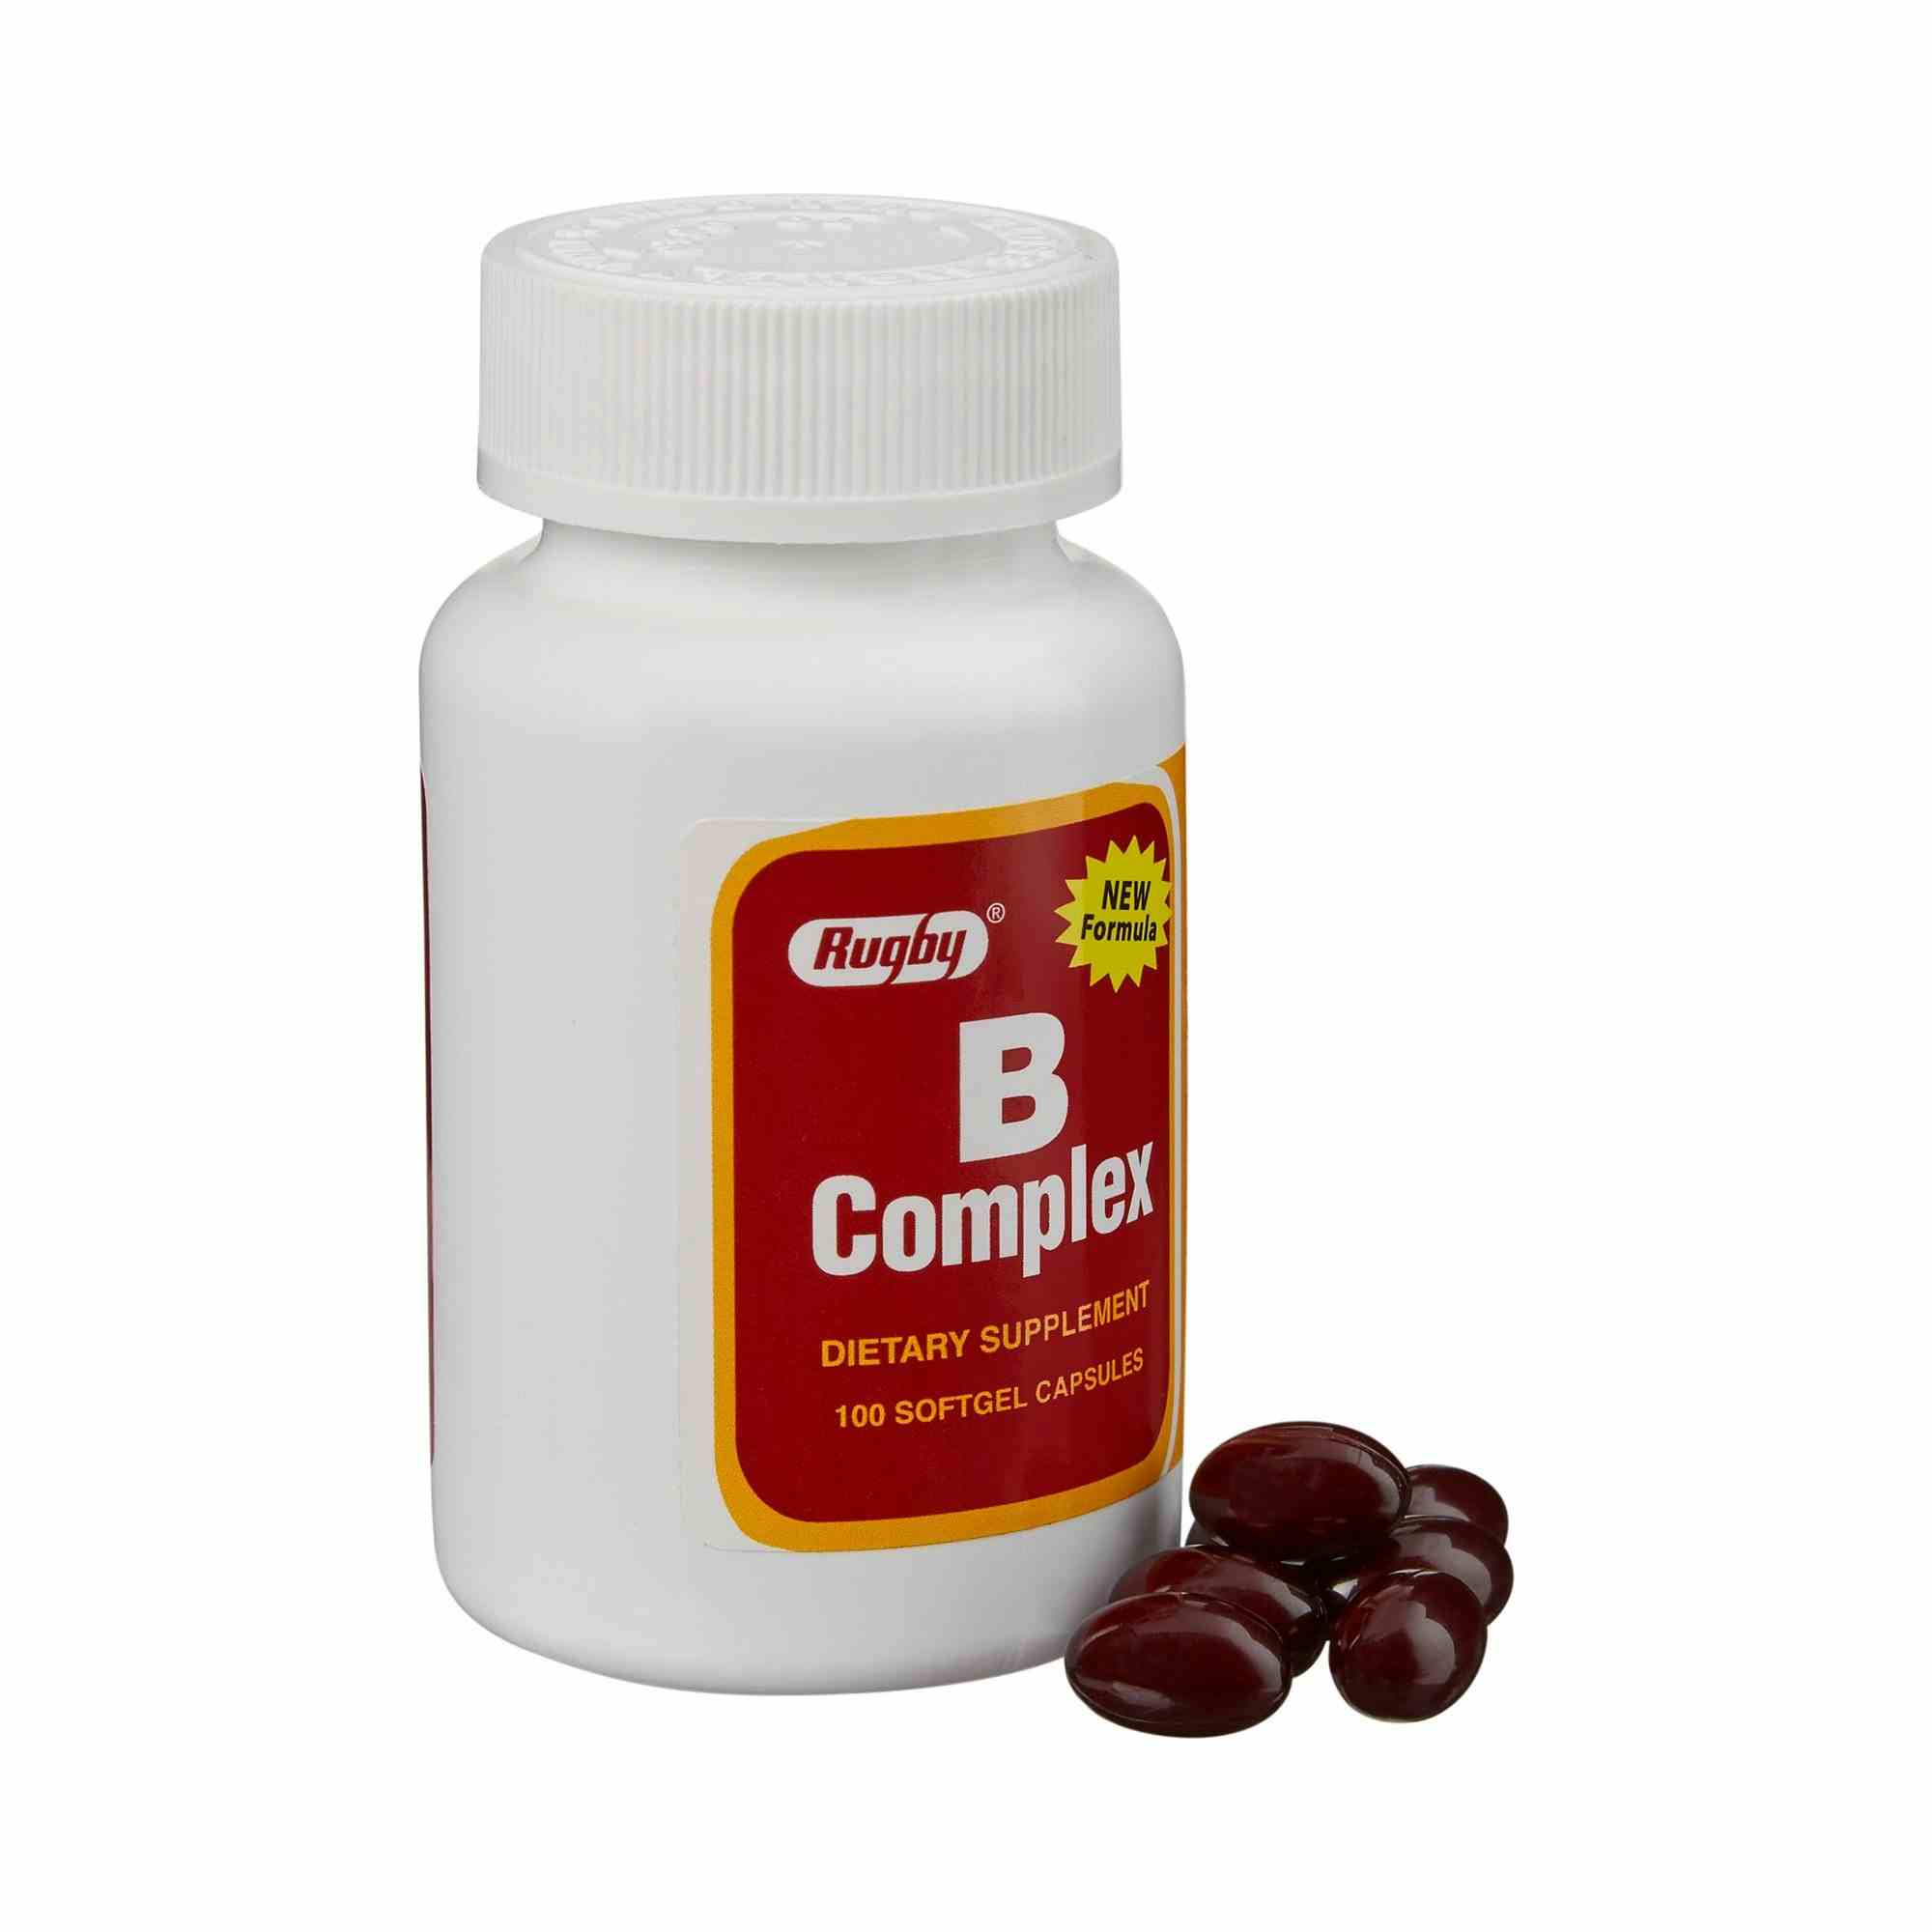 Rugby B-Complex Dietary Supplement, 60 mg, 100 Softgels, 00536478701, 1 Bottle